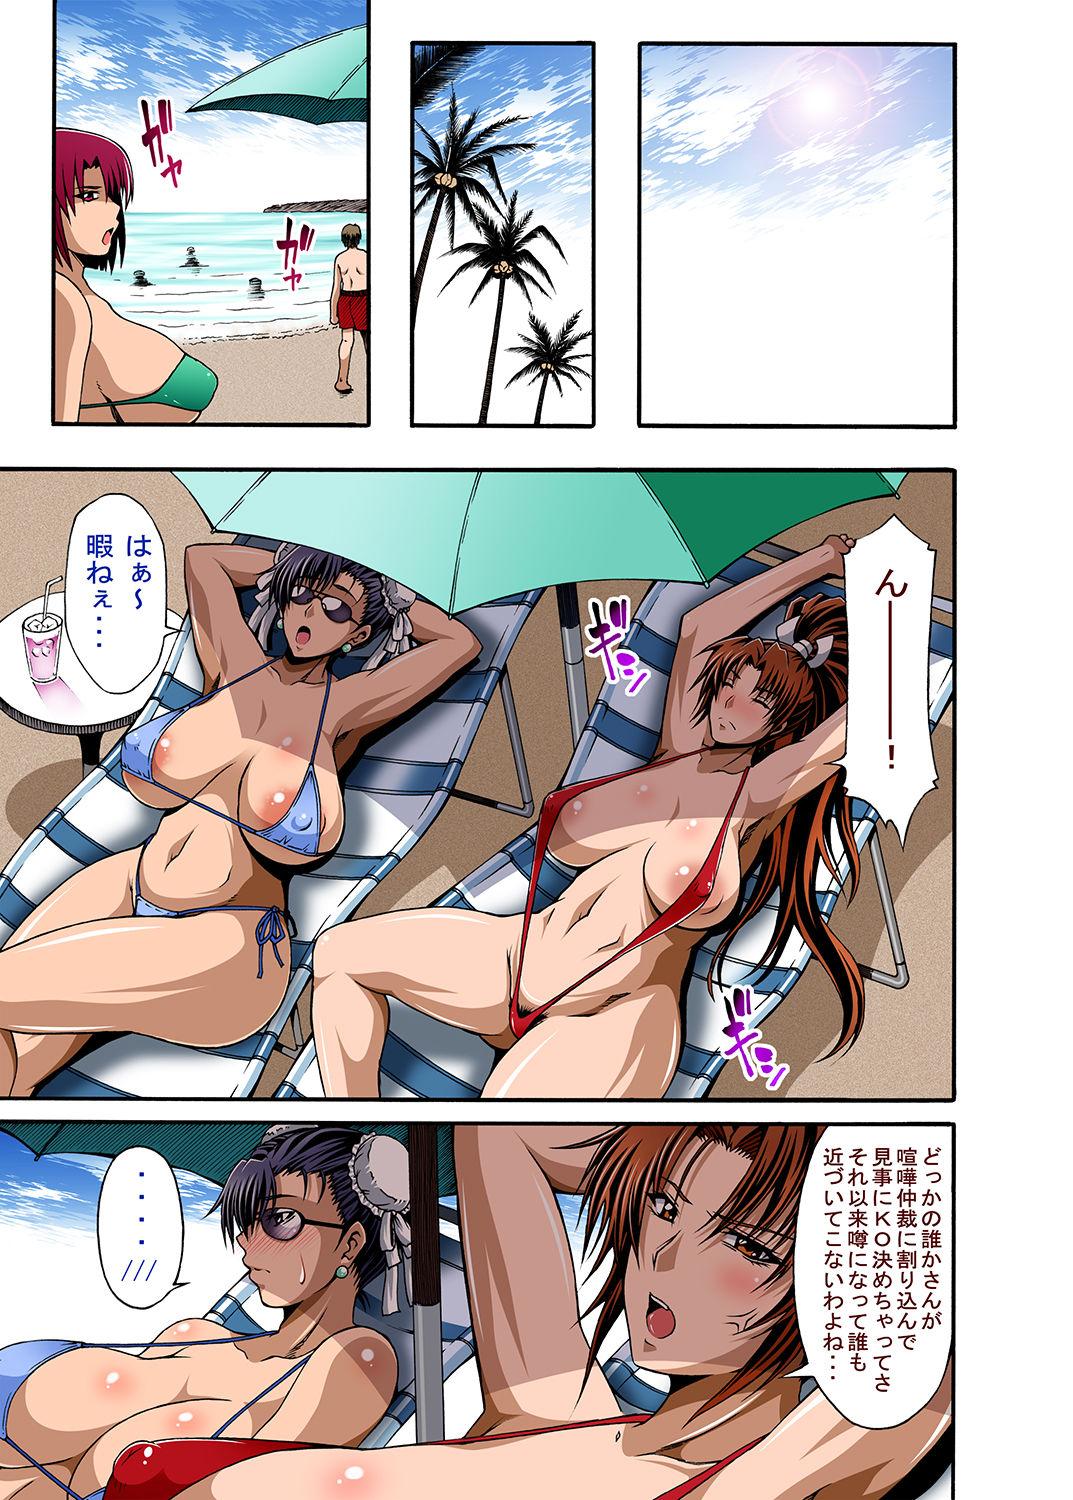 Small Tits Nipponichi Choroi Onna to Masegaki - Street fighter King of fighters Bus - Page 3